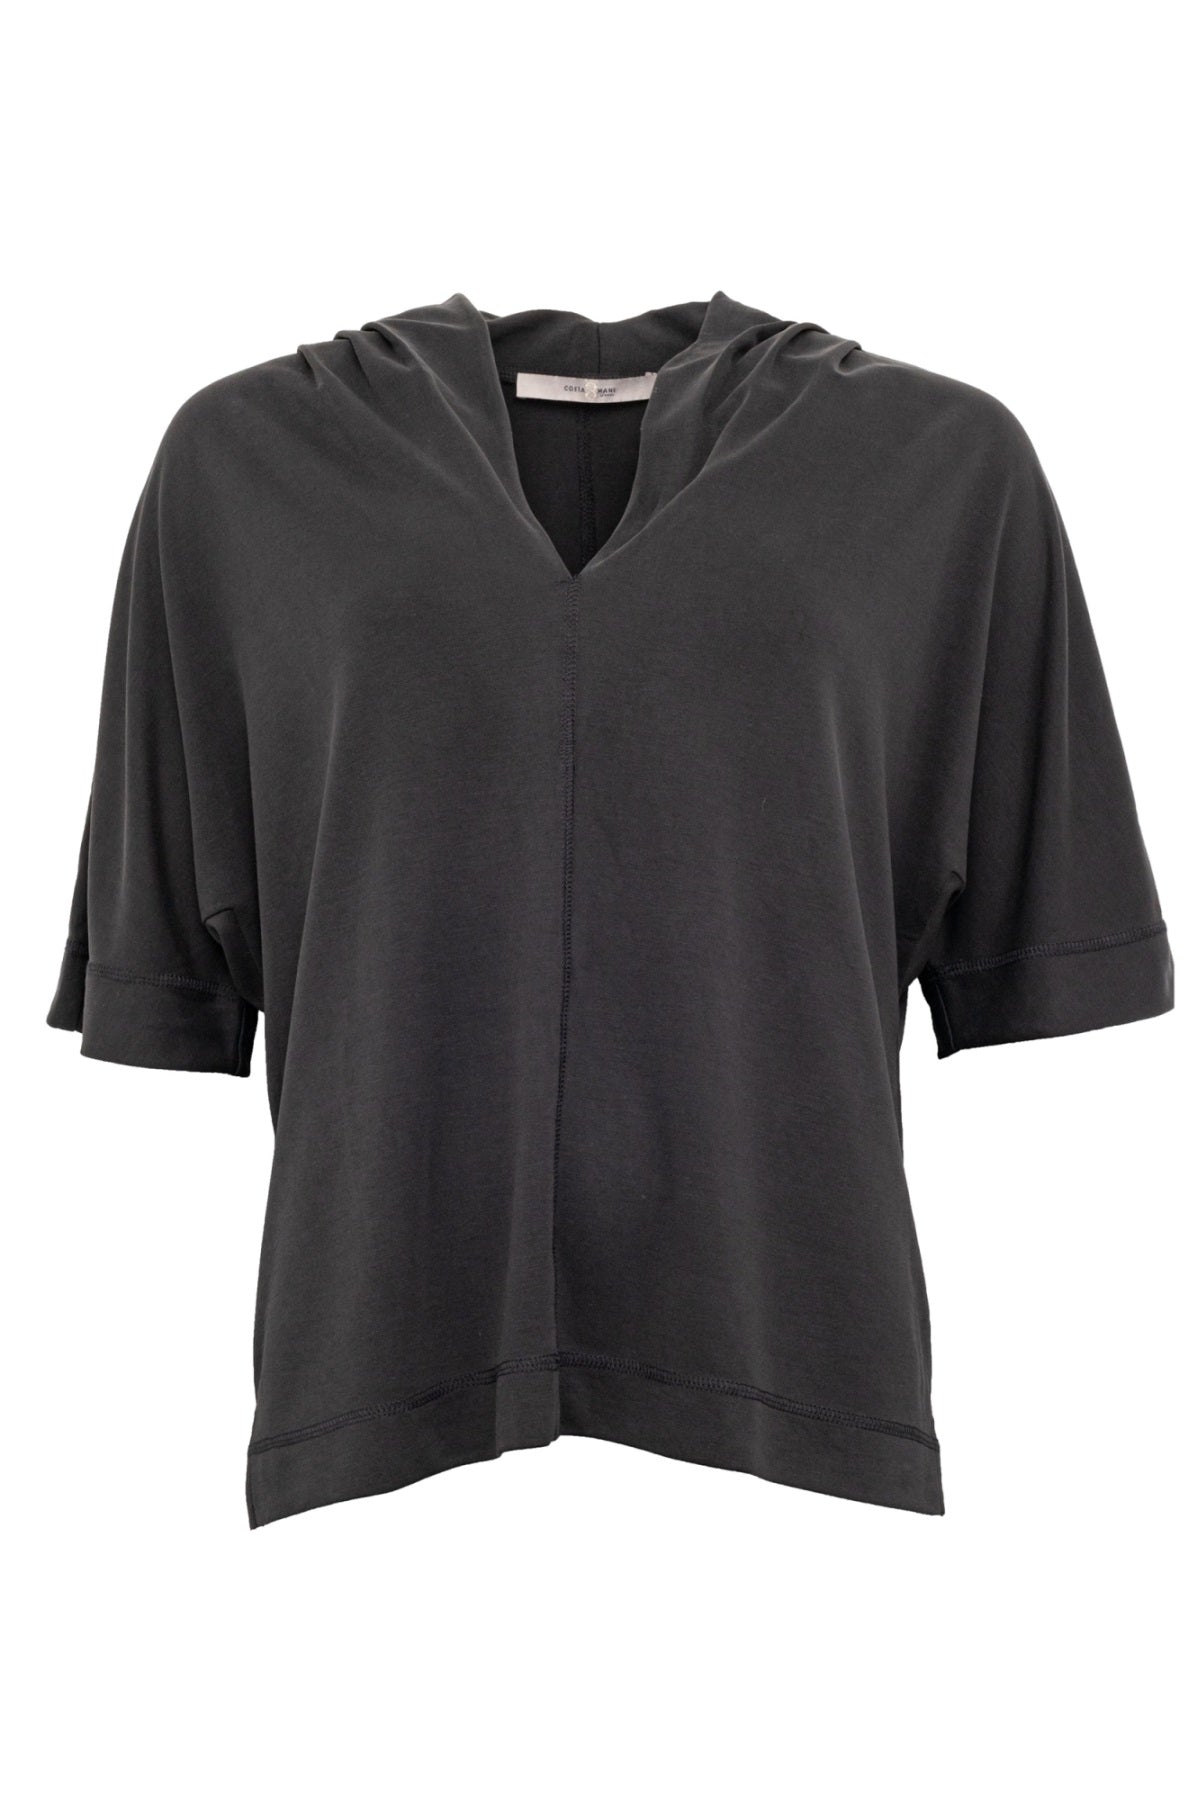 Costamani Claccy Blouse, Black